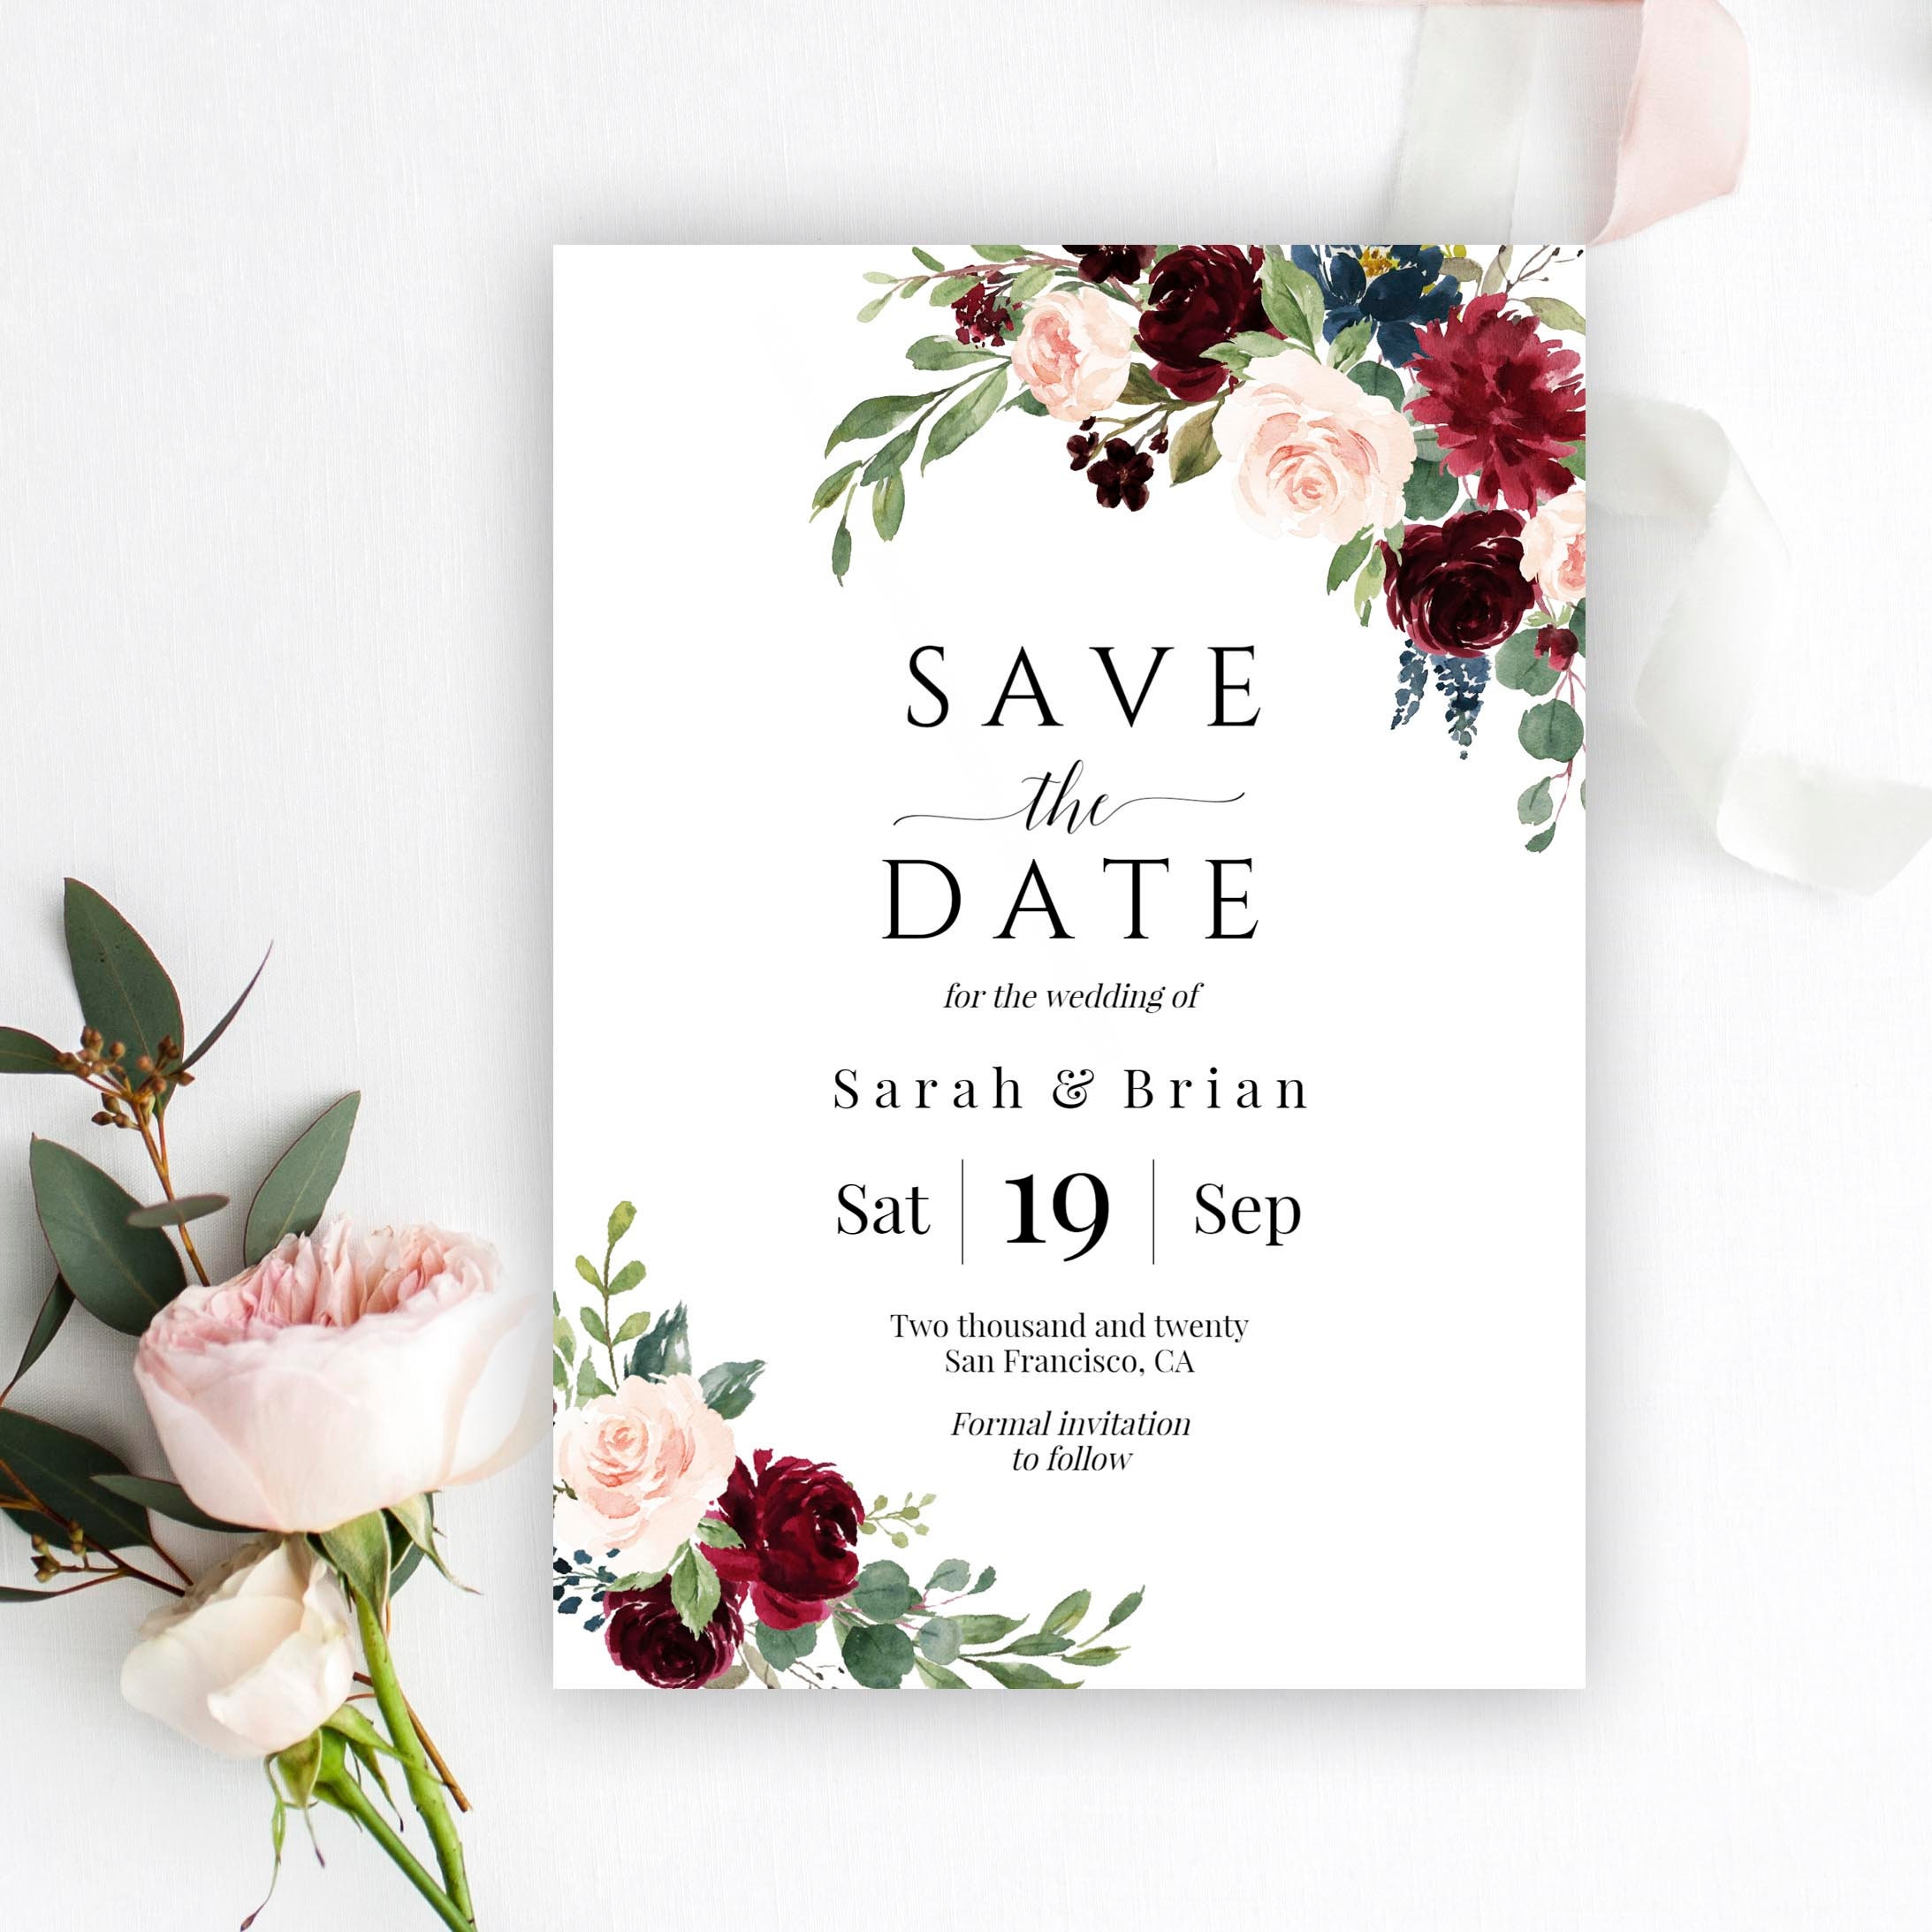 Save the Date Template, Instant Download, Save the Date Cards, Printable Save  the Date, Burgundy Save the Day Invites DIY, Templett, C6 (Instant  Download) 